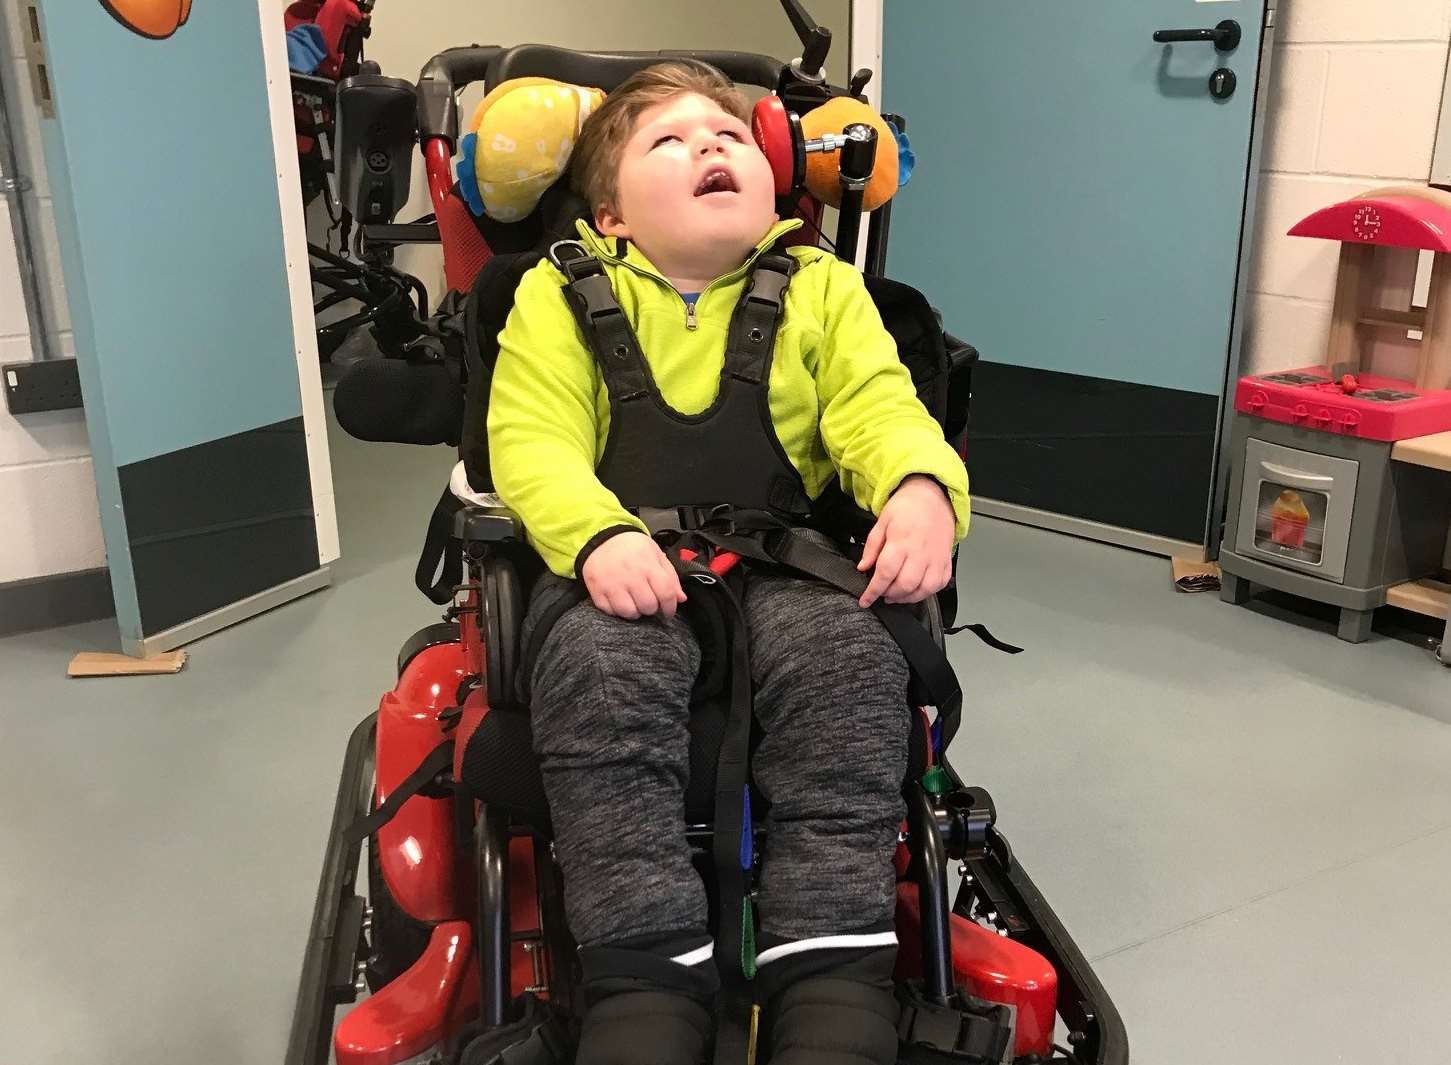 The Ratcliffes are raising money to get a new wheelchair worth £20,000 for Curtis